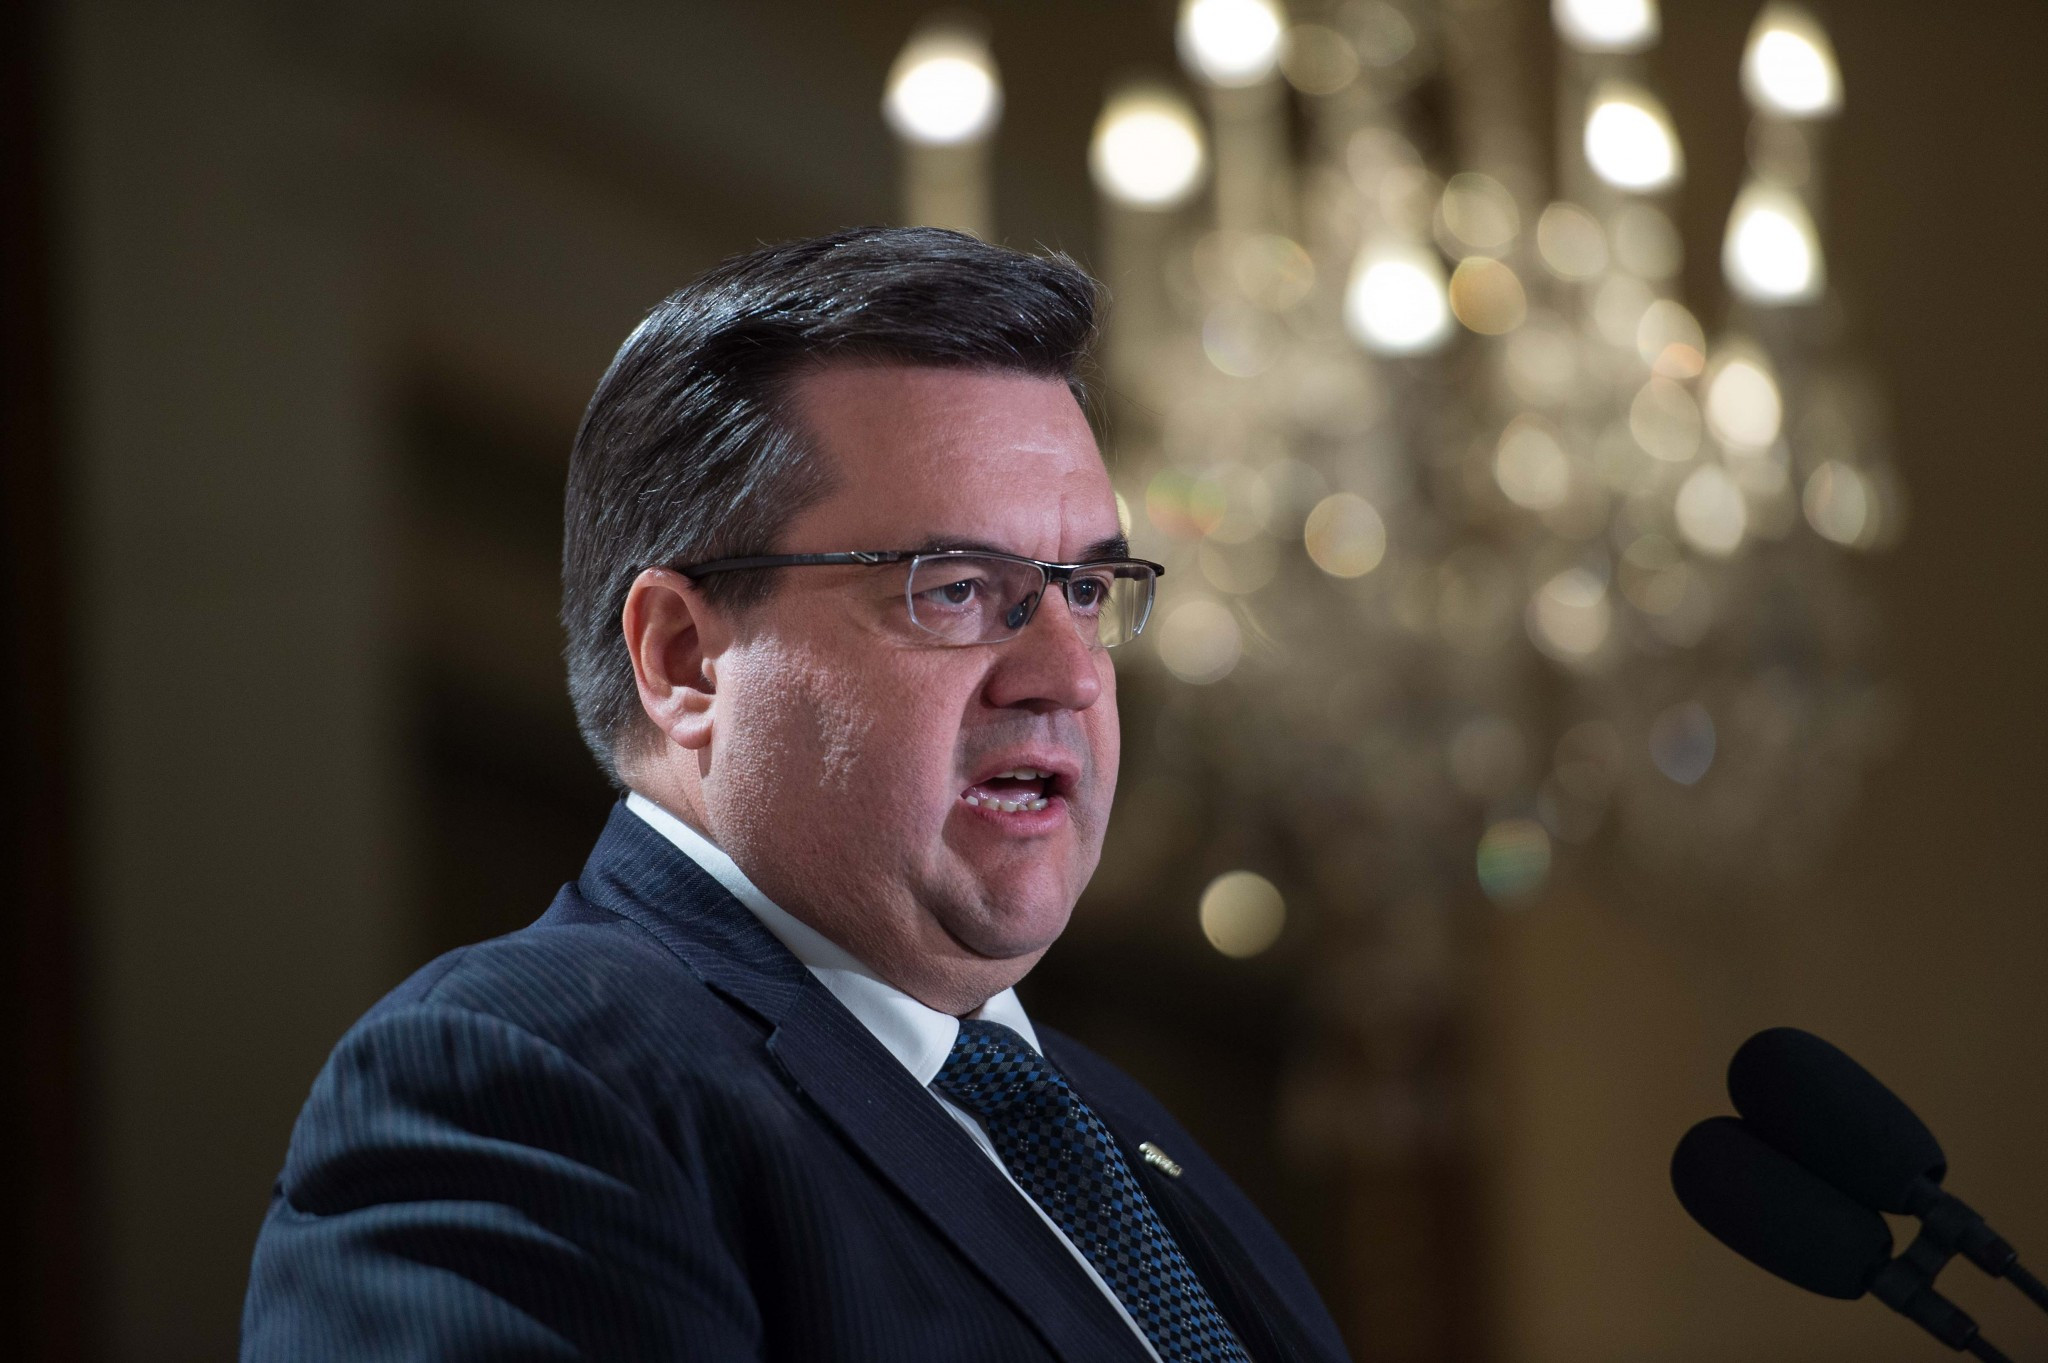 Denis Coderre has welcomed the taekwondo players that will be competing in the upcoming tournaments in Montreal ©Getty Images